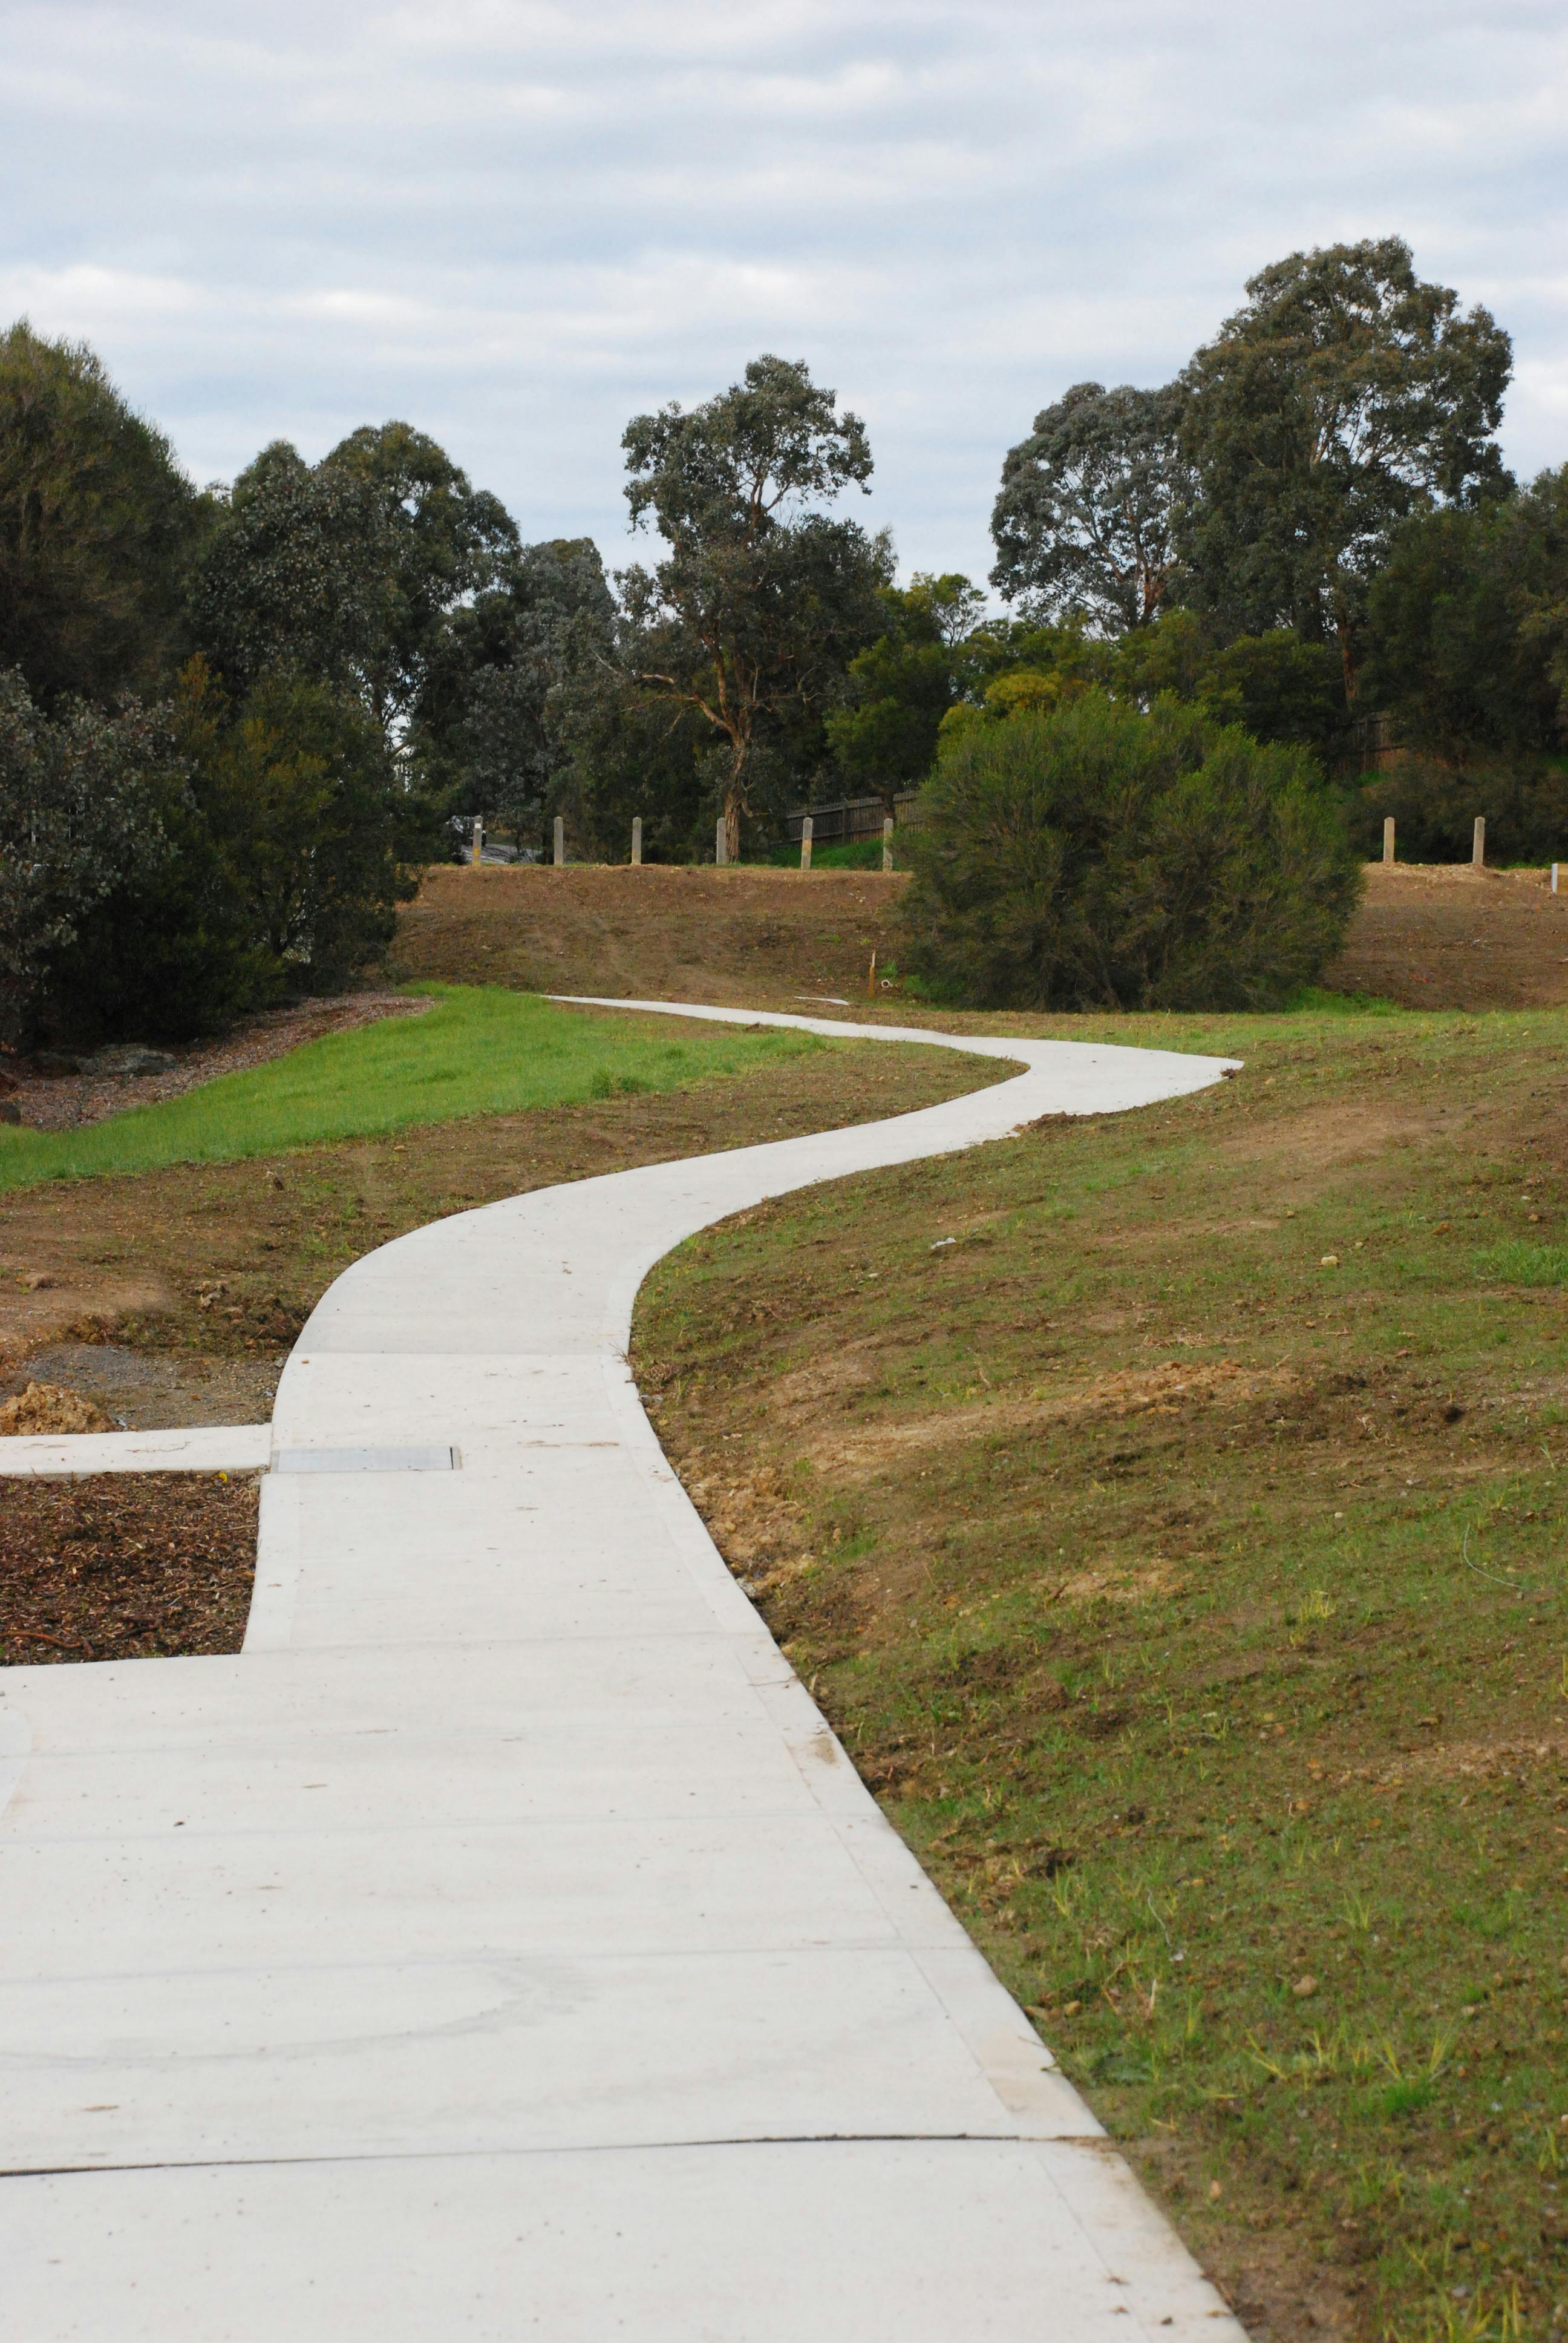 New Footpaths Have Been Installed